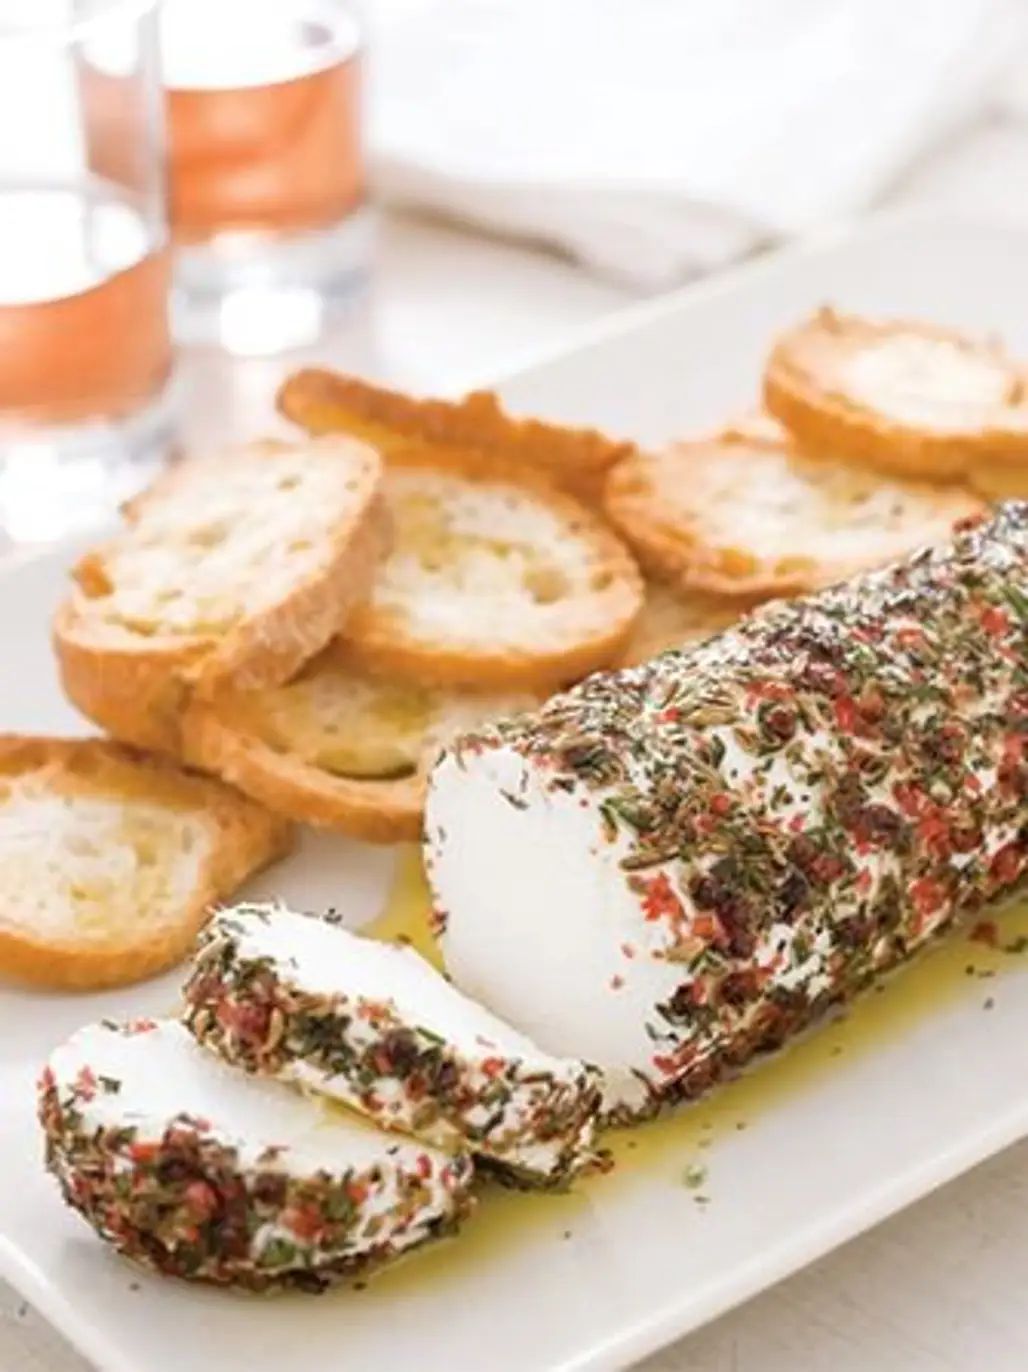 Goat Cheese with Pink Peppercorns and Herbs